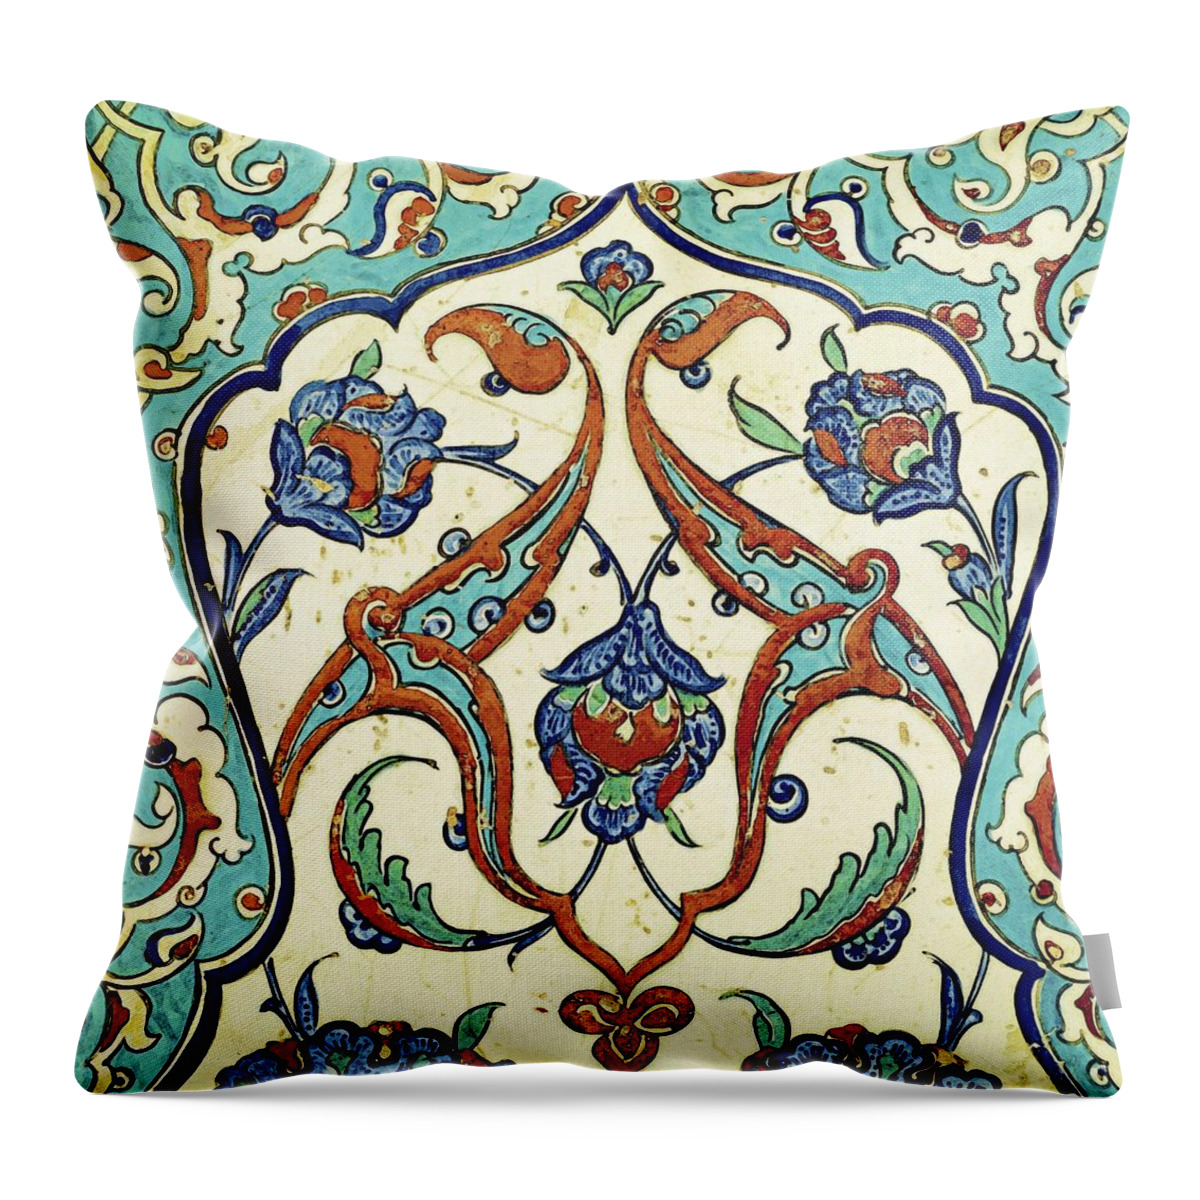 Turkish Throw Pillow featuring the painting An Iznik Polychrome Tile, Turkey, circa 1580, by Adam Asar, No 20k by Celestial Images